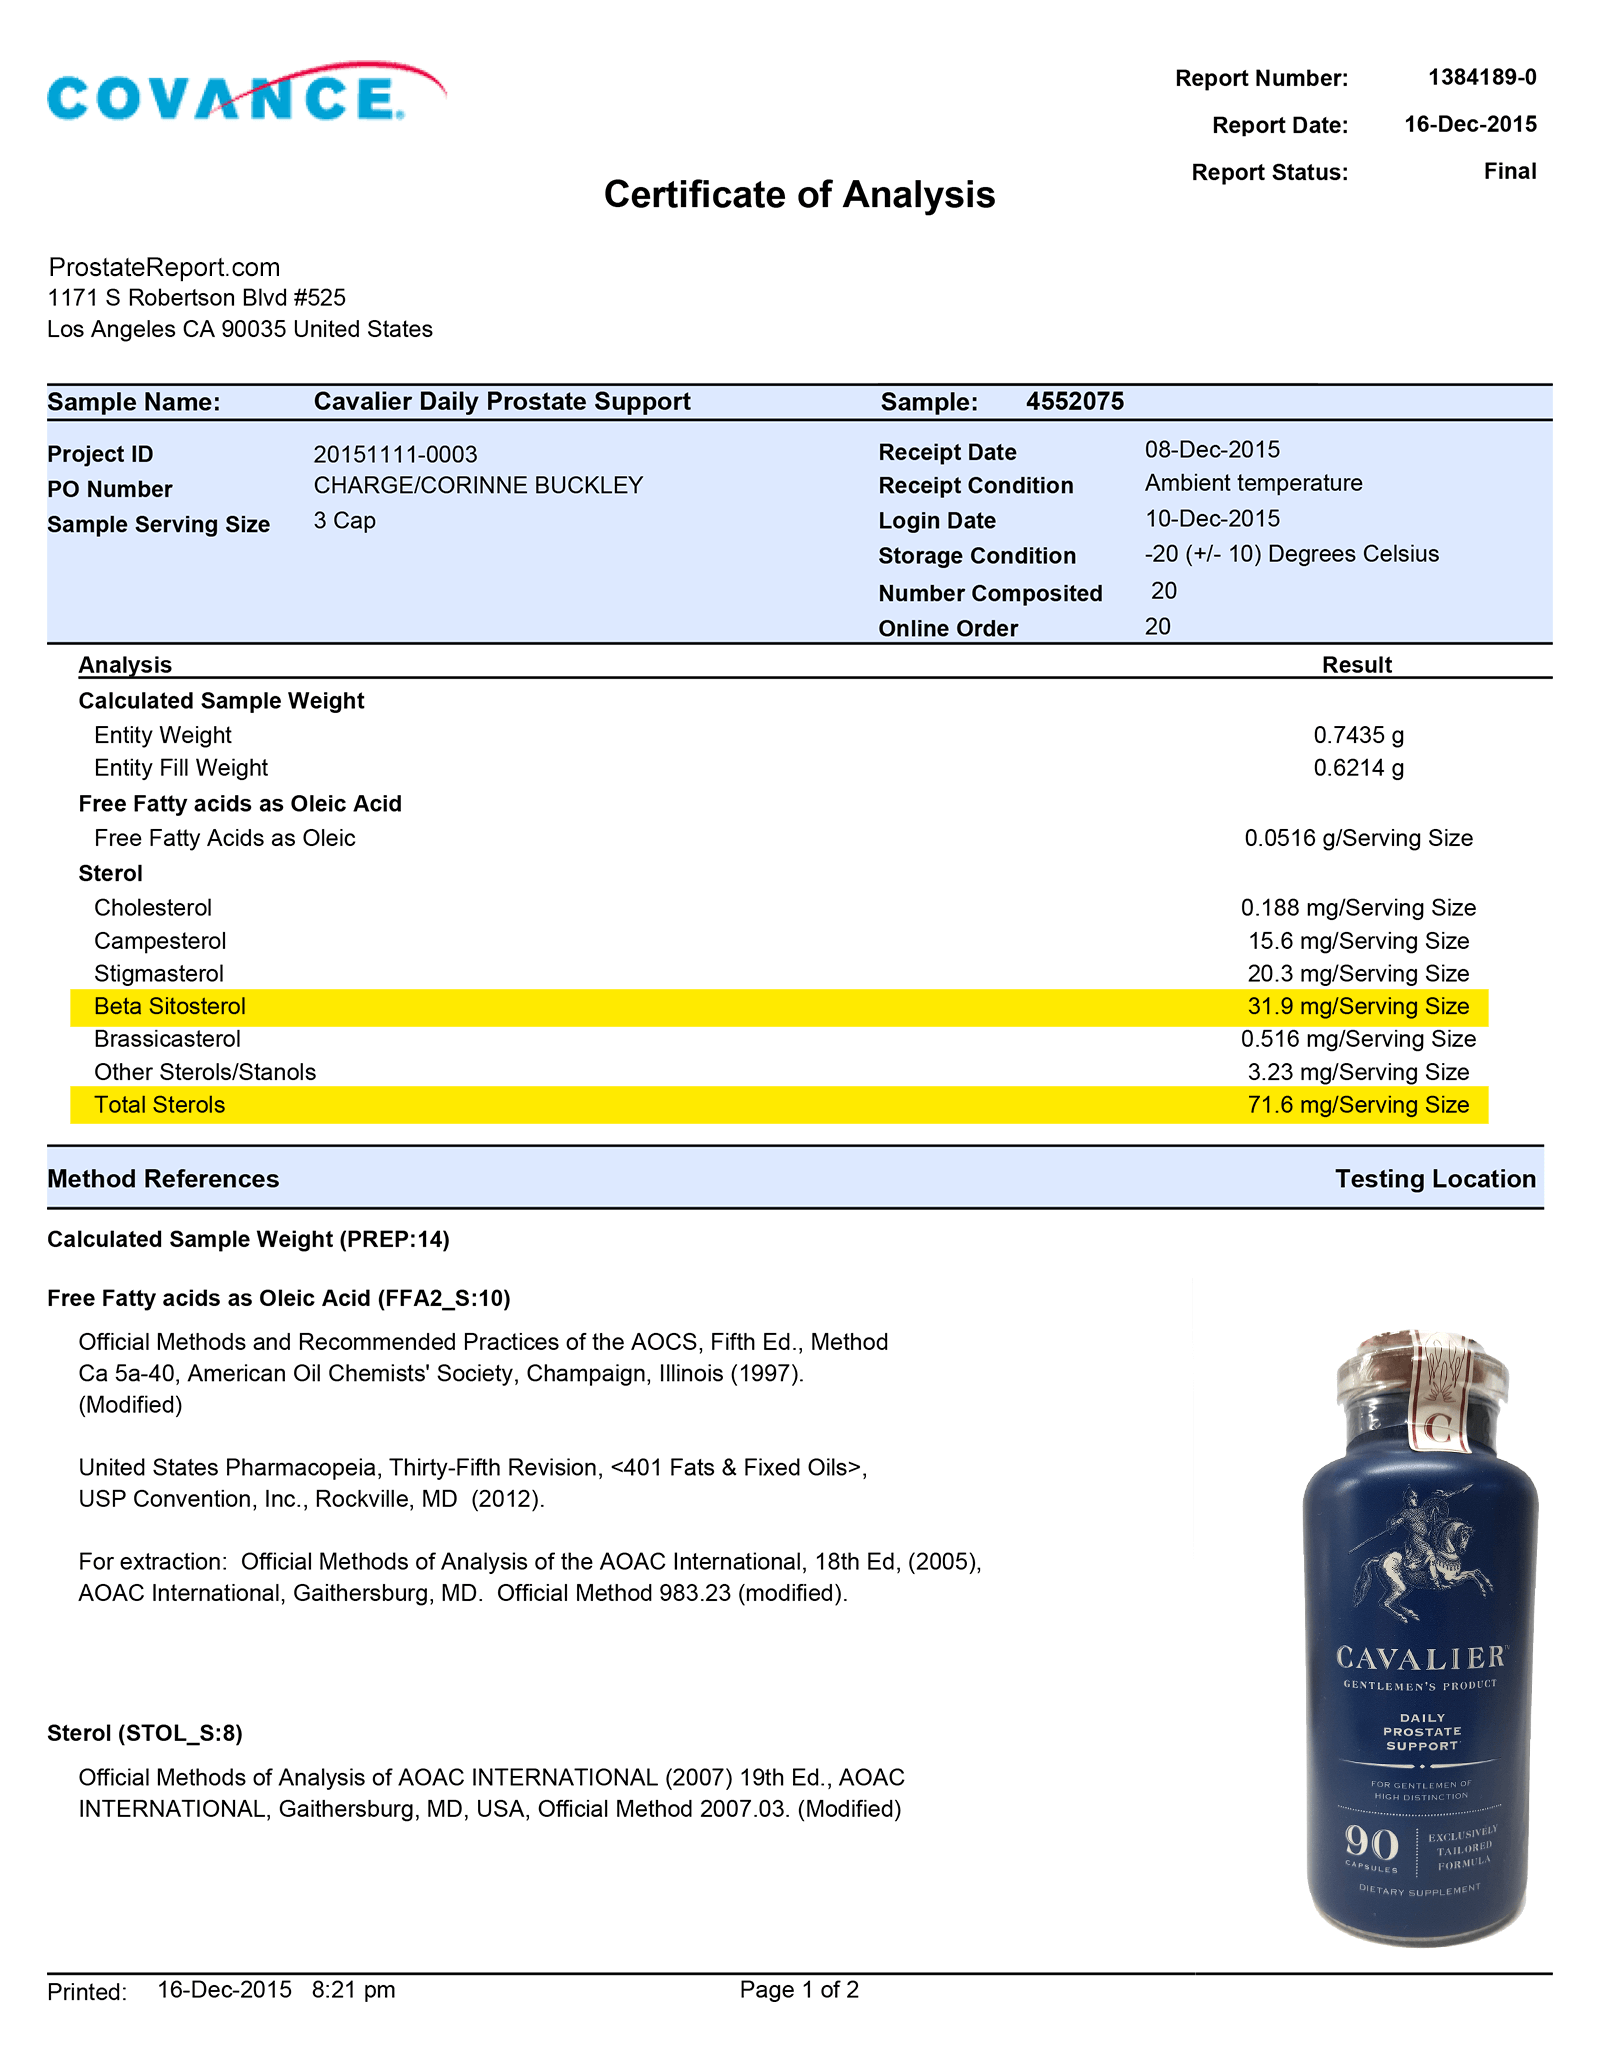 Cavalier Daily Prostate Support lab report 